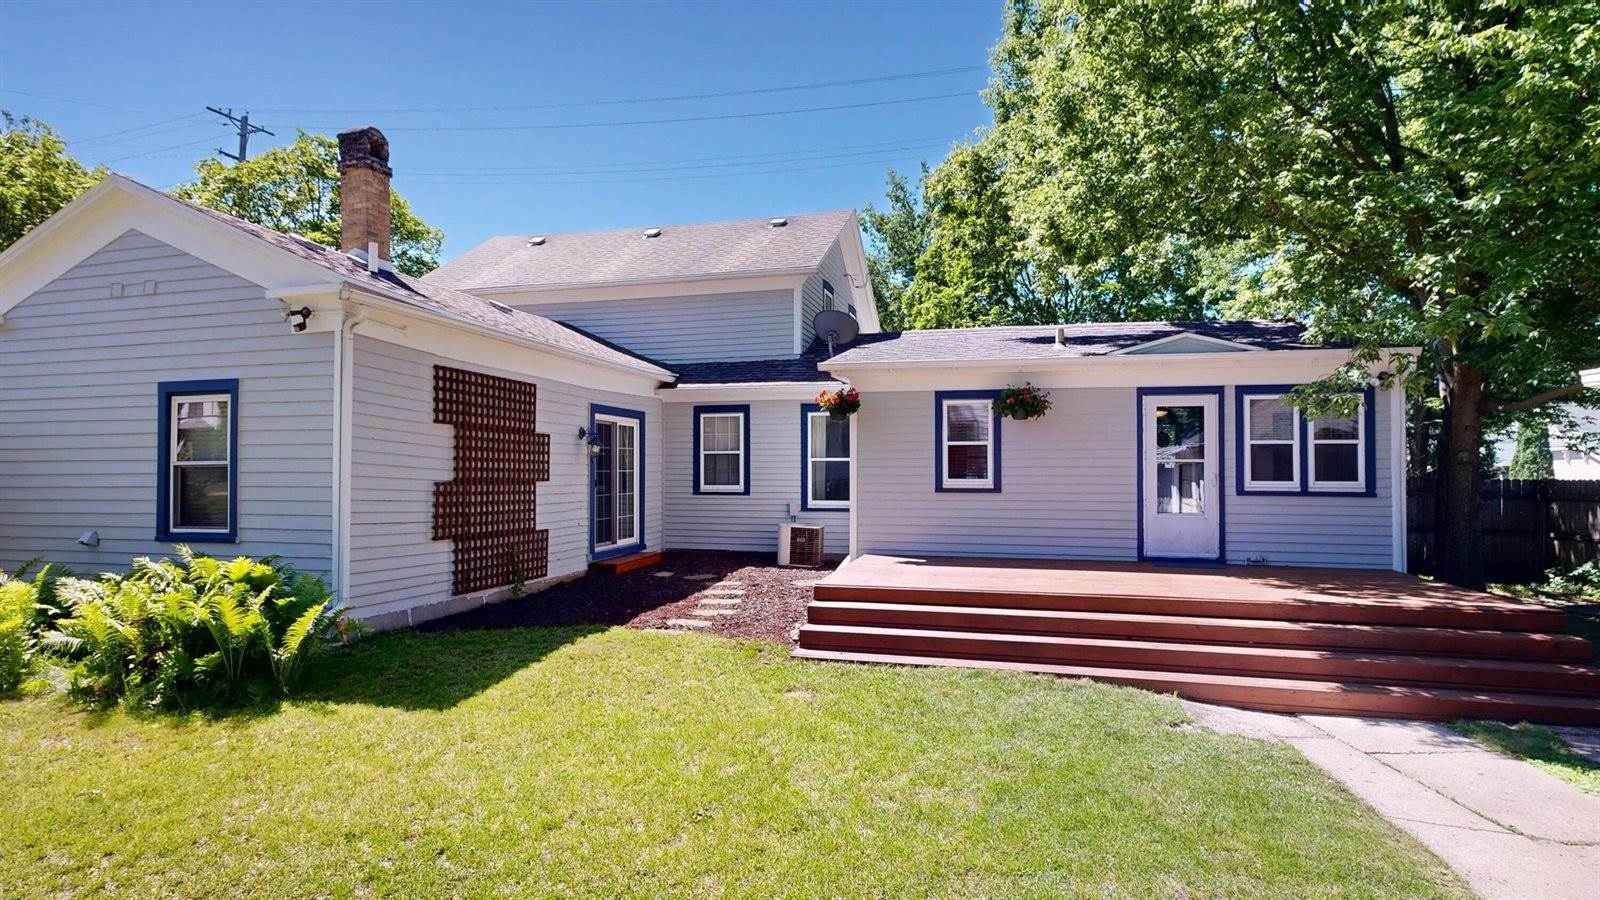 338 Foster St, Fort Atkinson, WI 53538